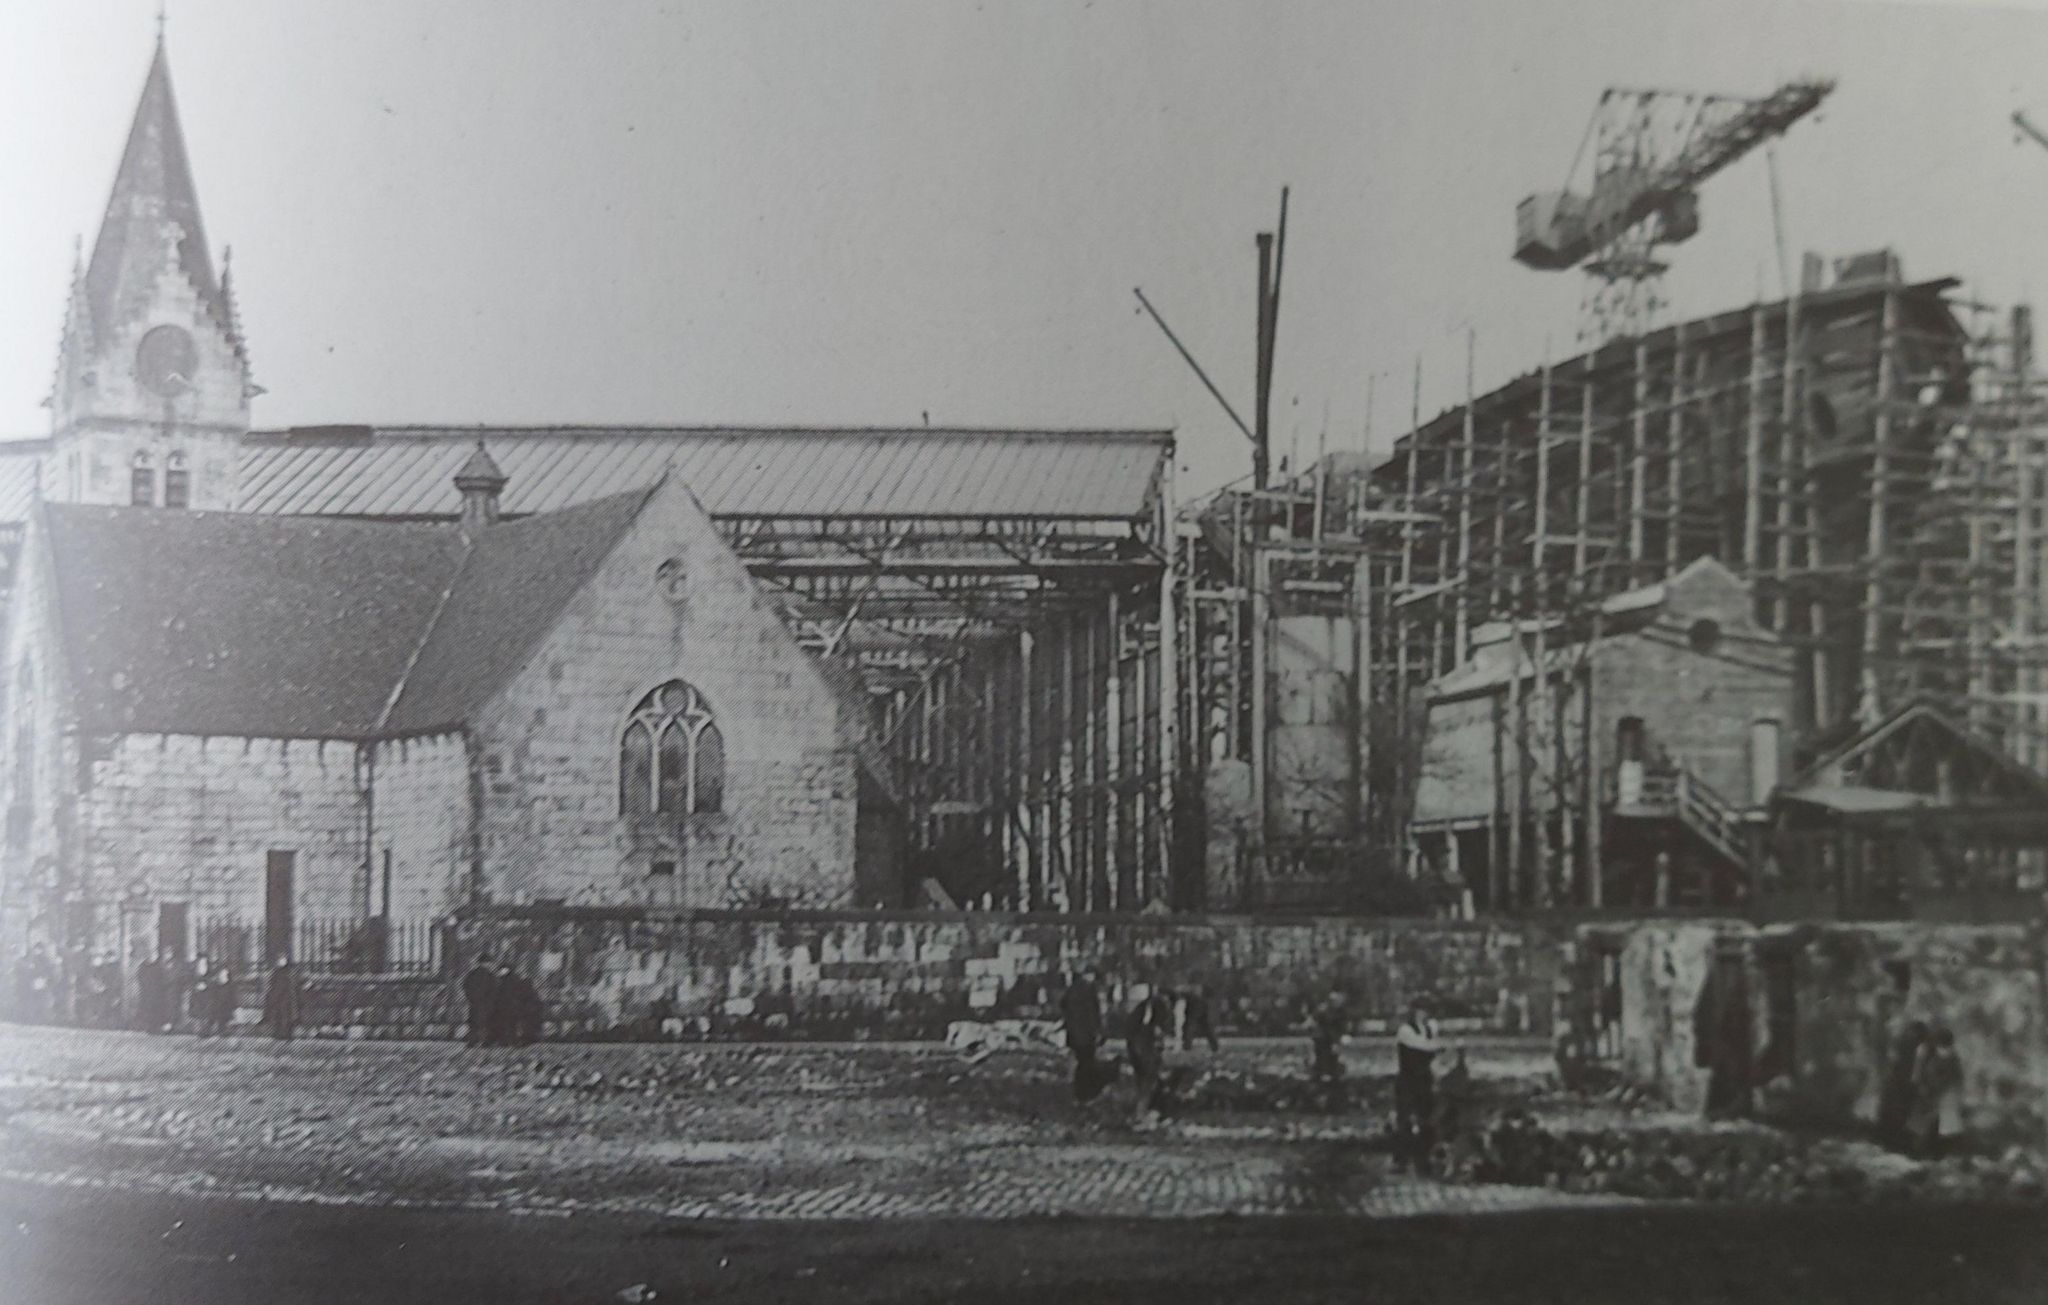 The church in its original site with a ship being built in the background